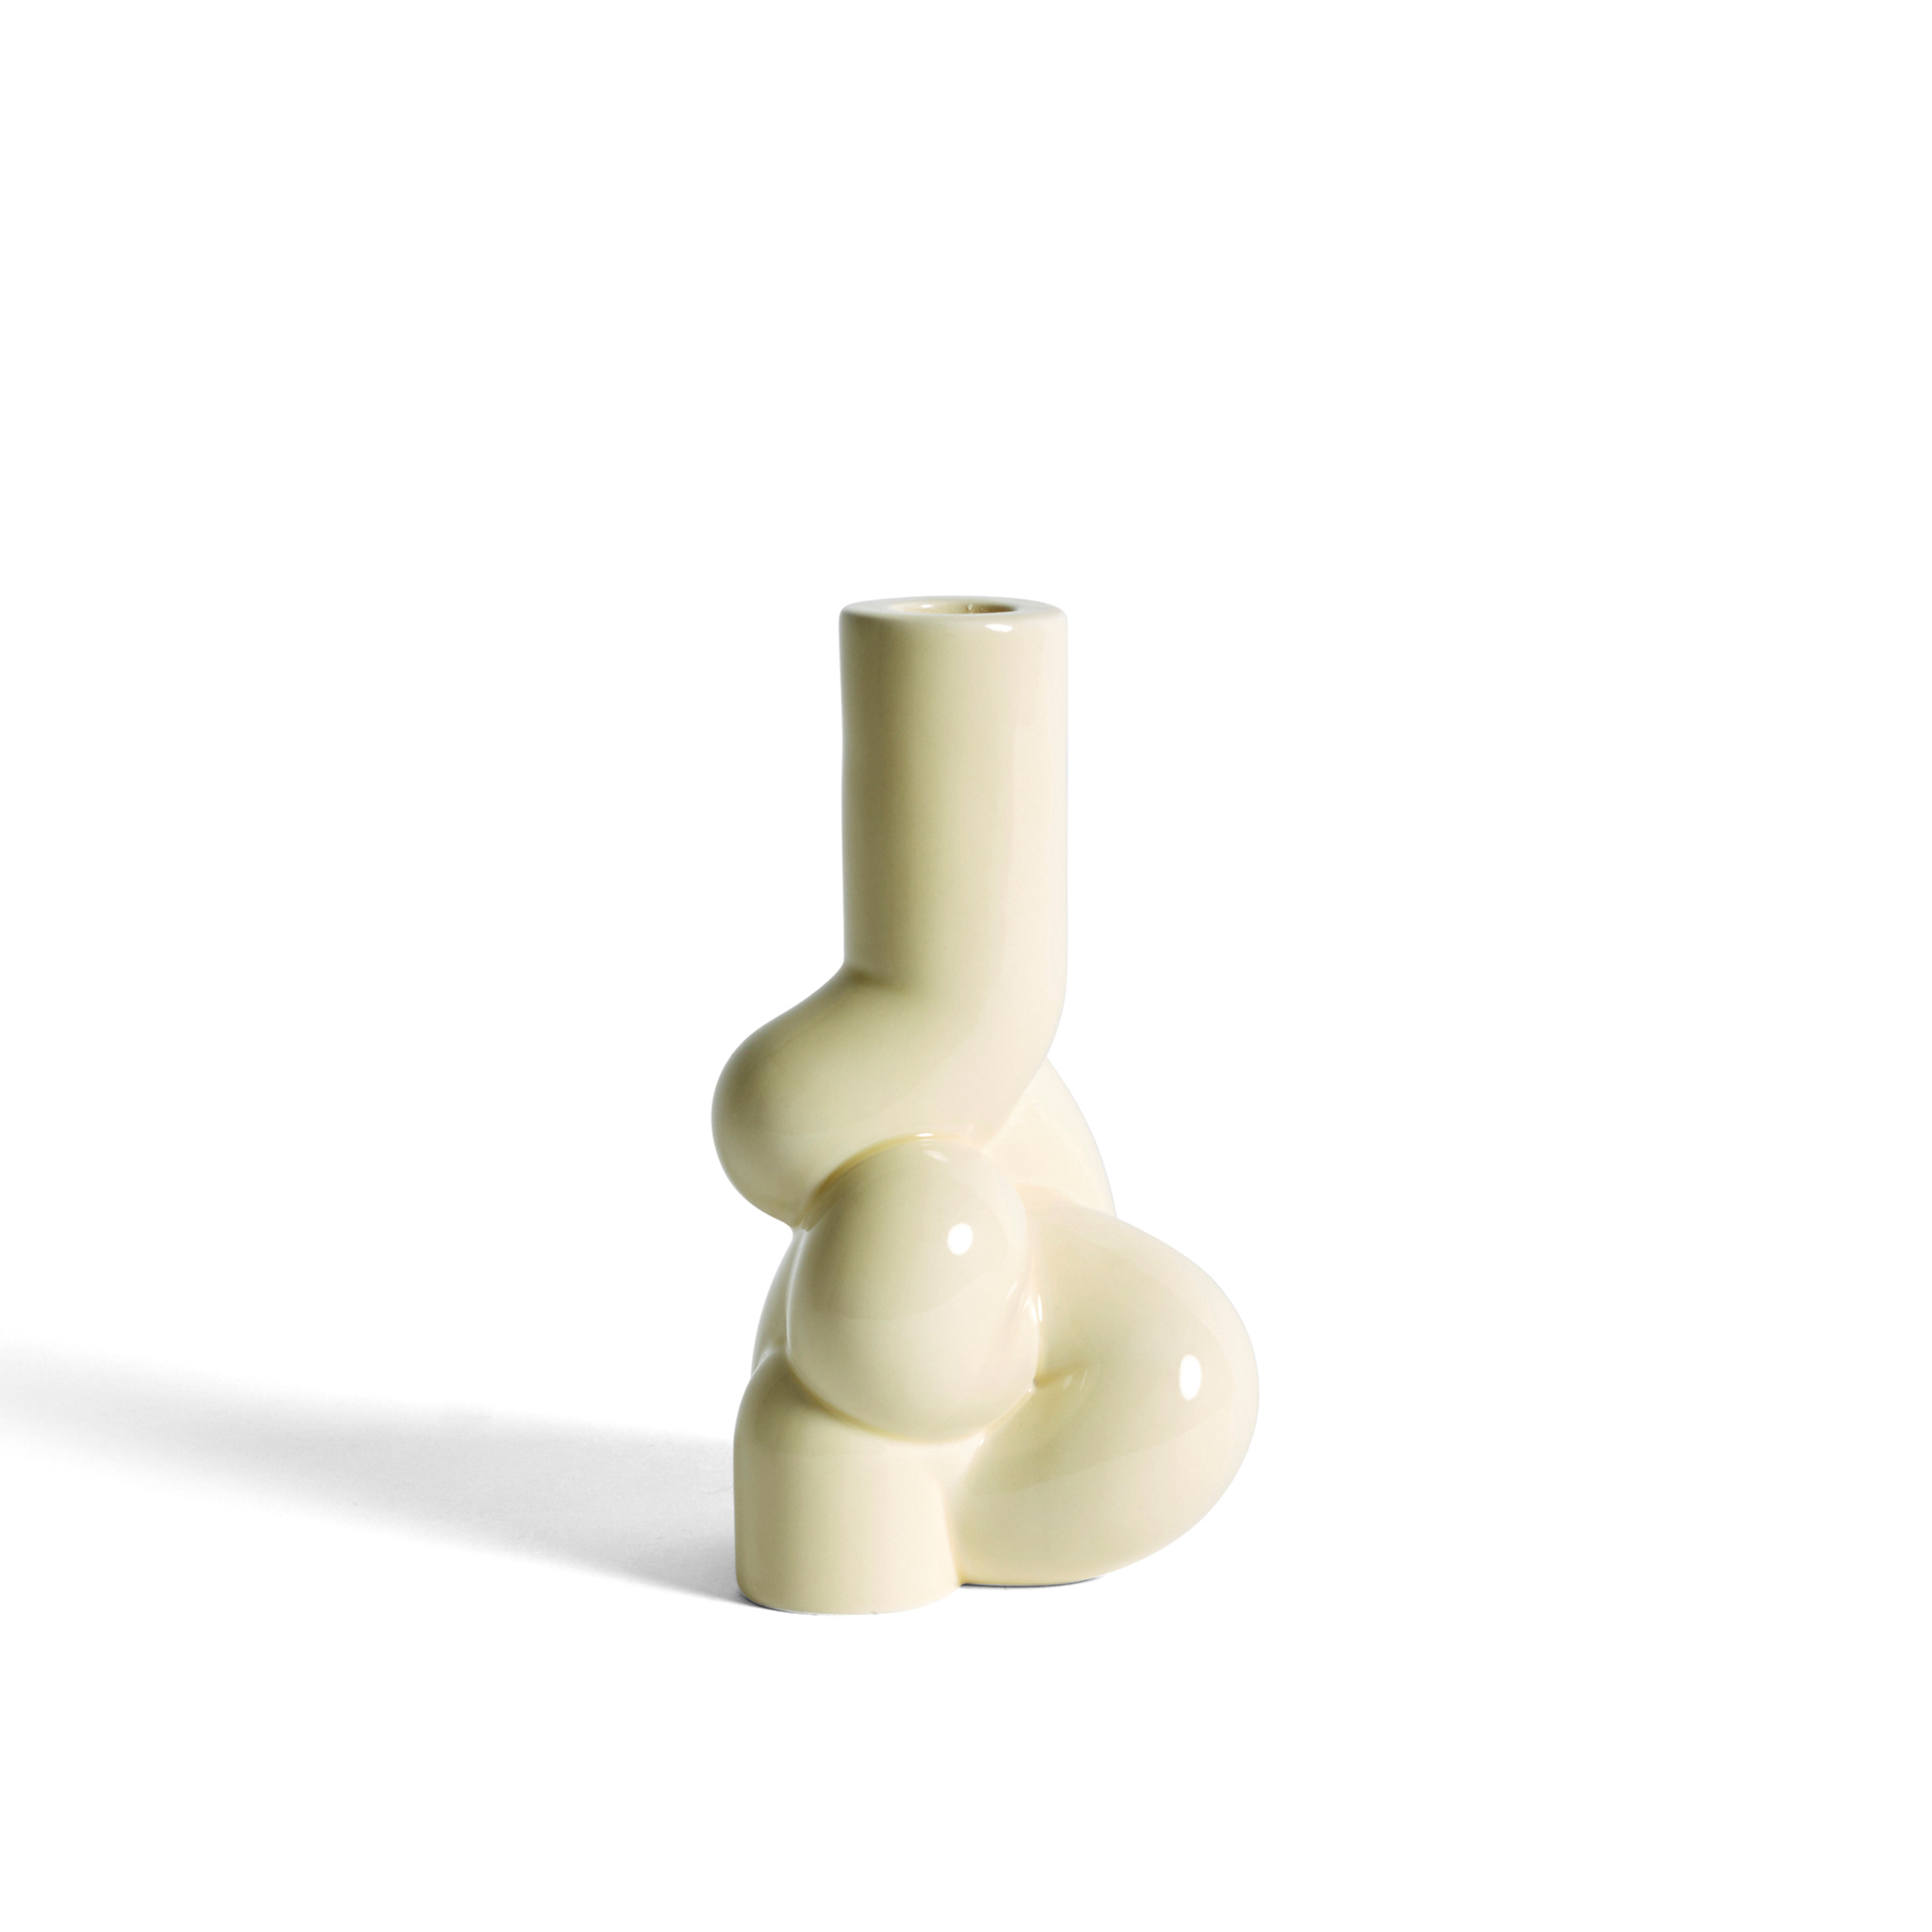 W&S Candleholder by Wang & Söderström for Hay